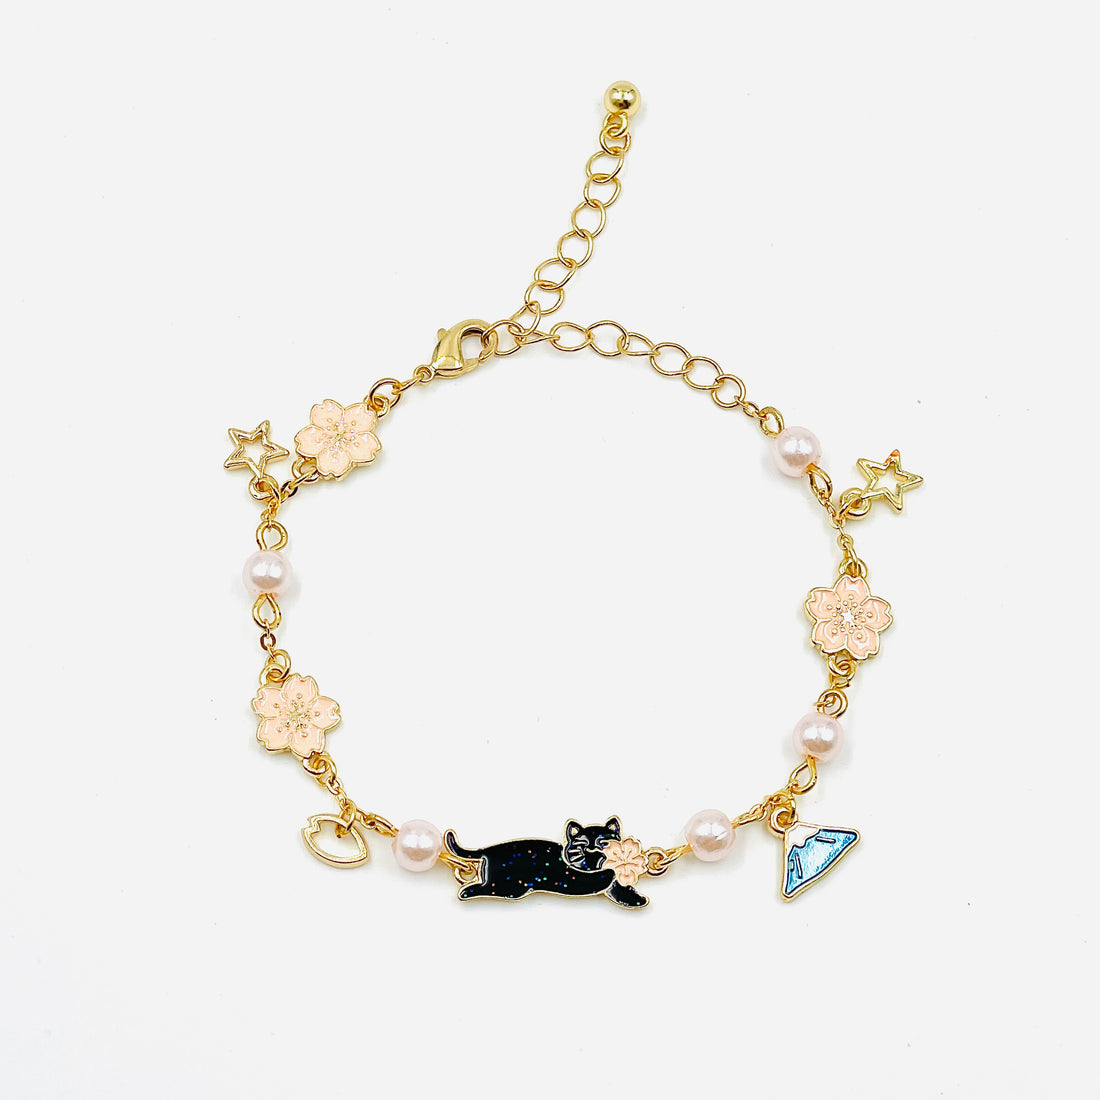 charm bracelet with fujisan and cat charms in gold